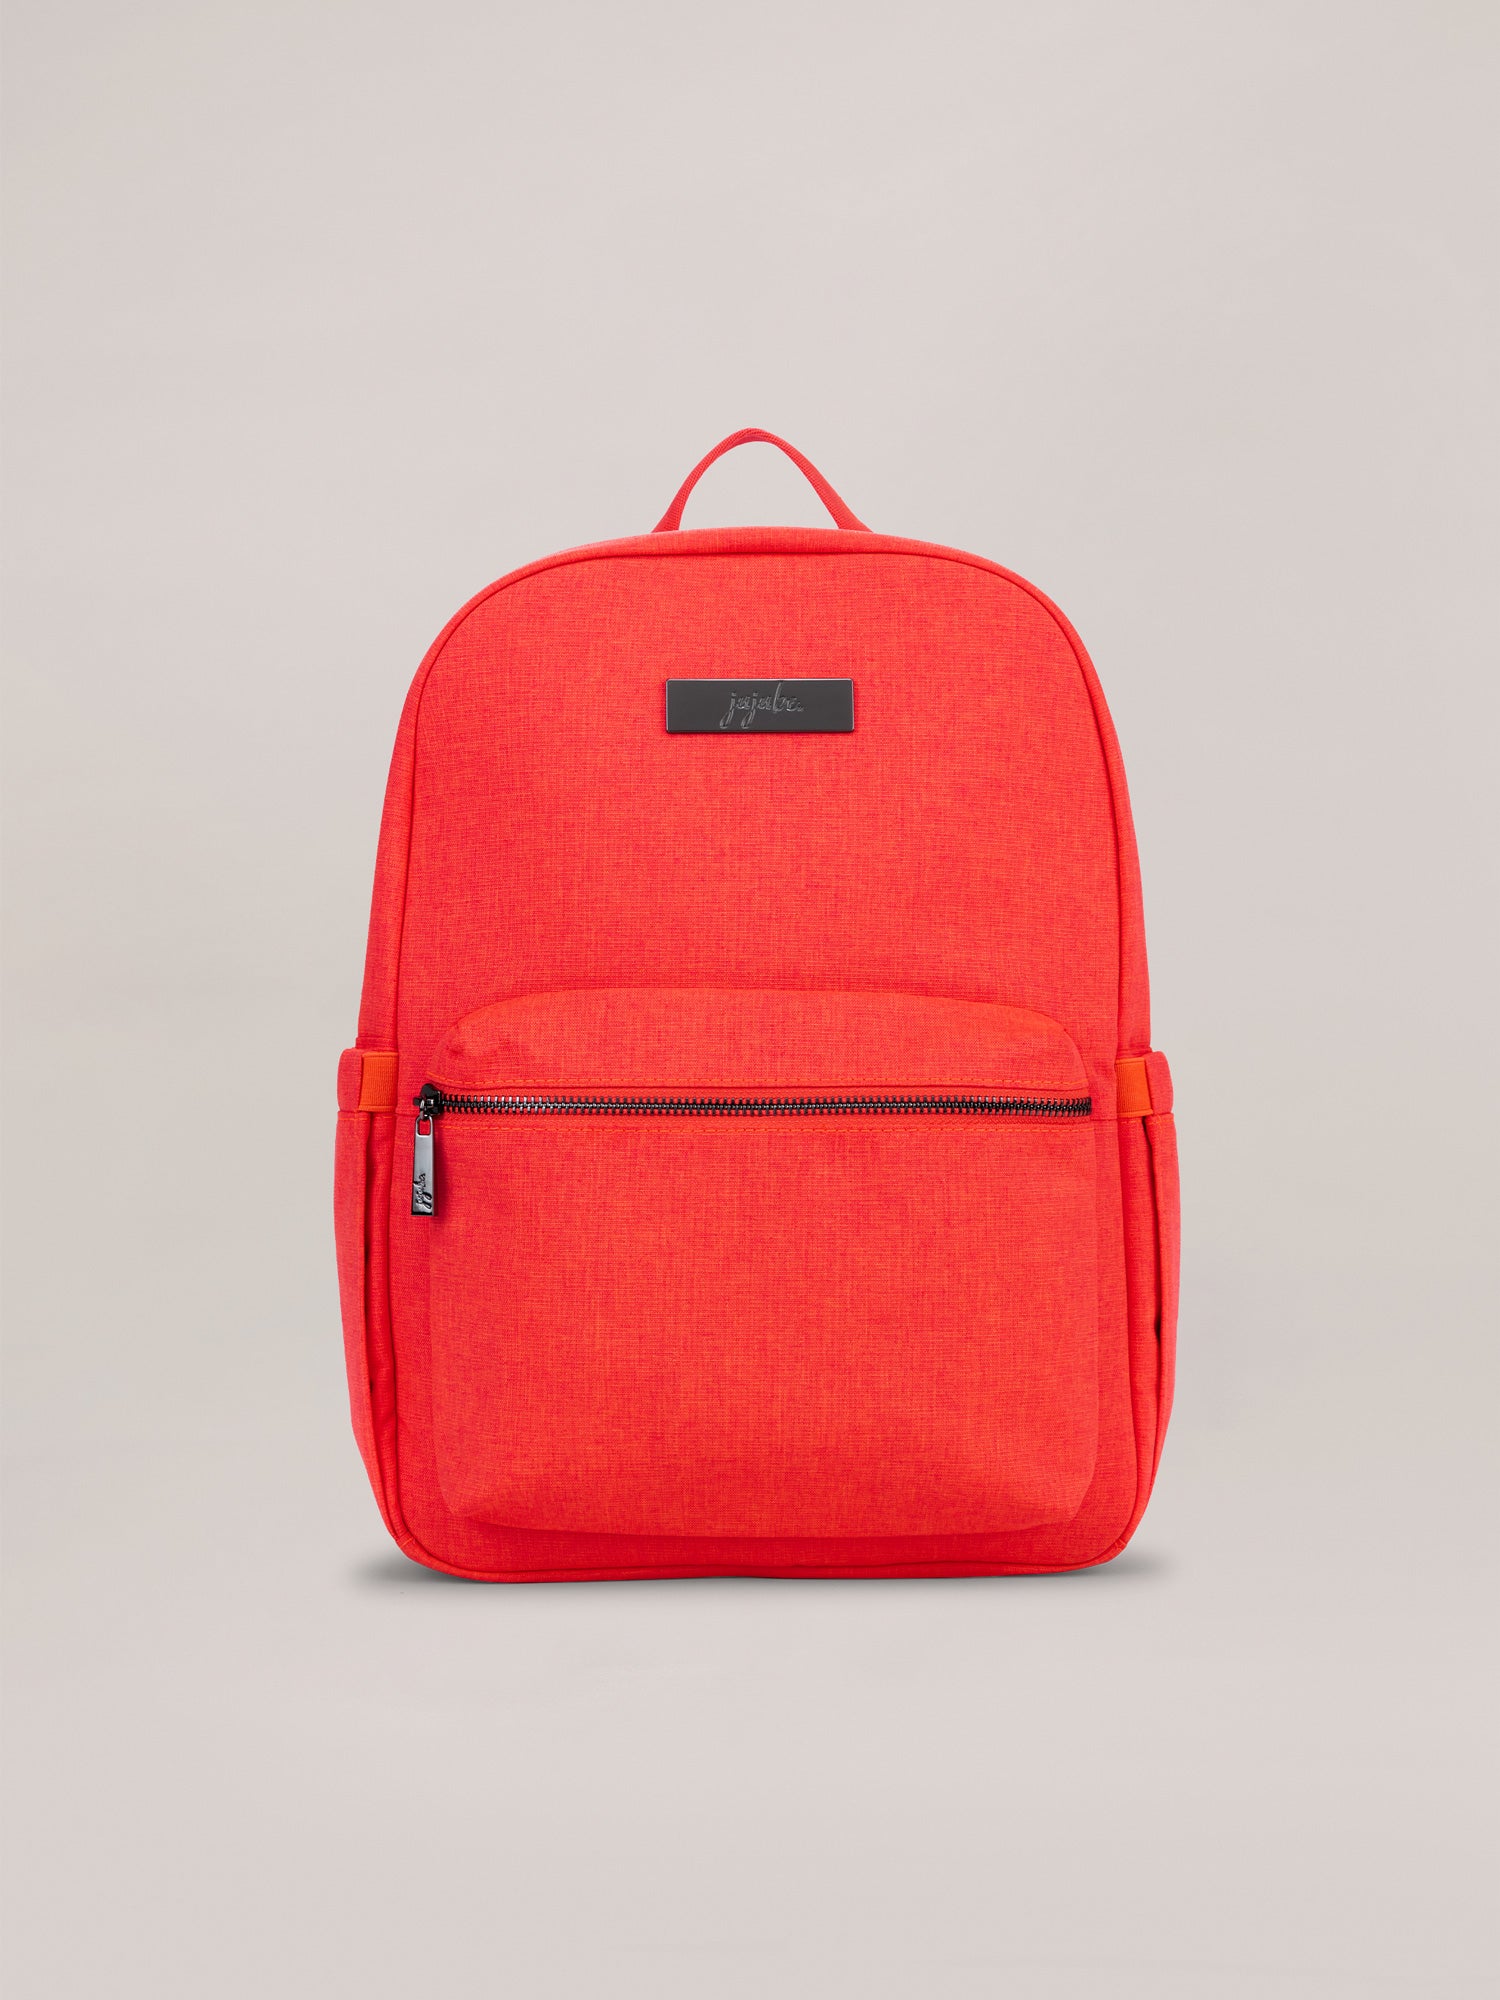 Neon Coral Pink Midi Backpack Front View